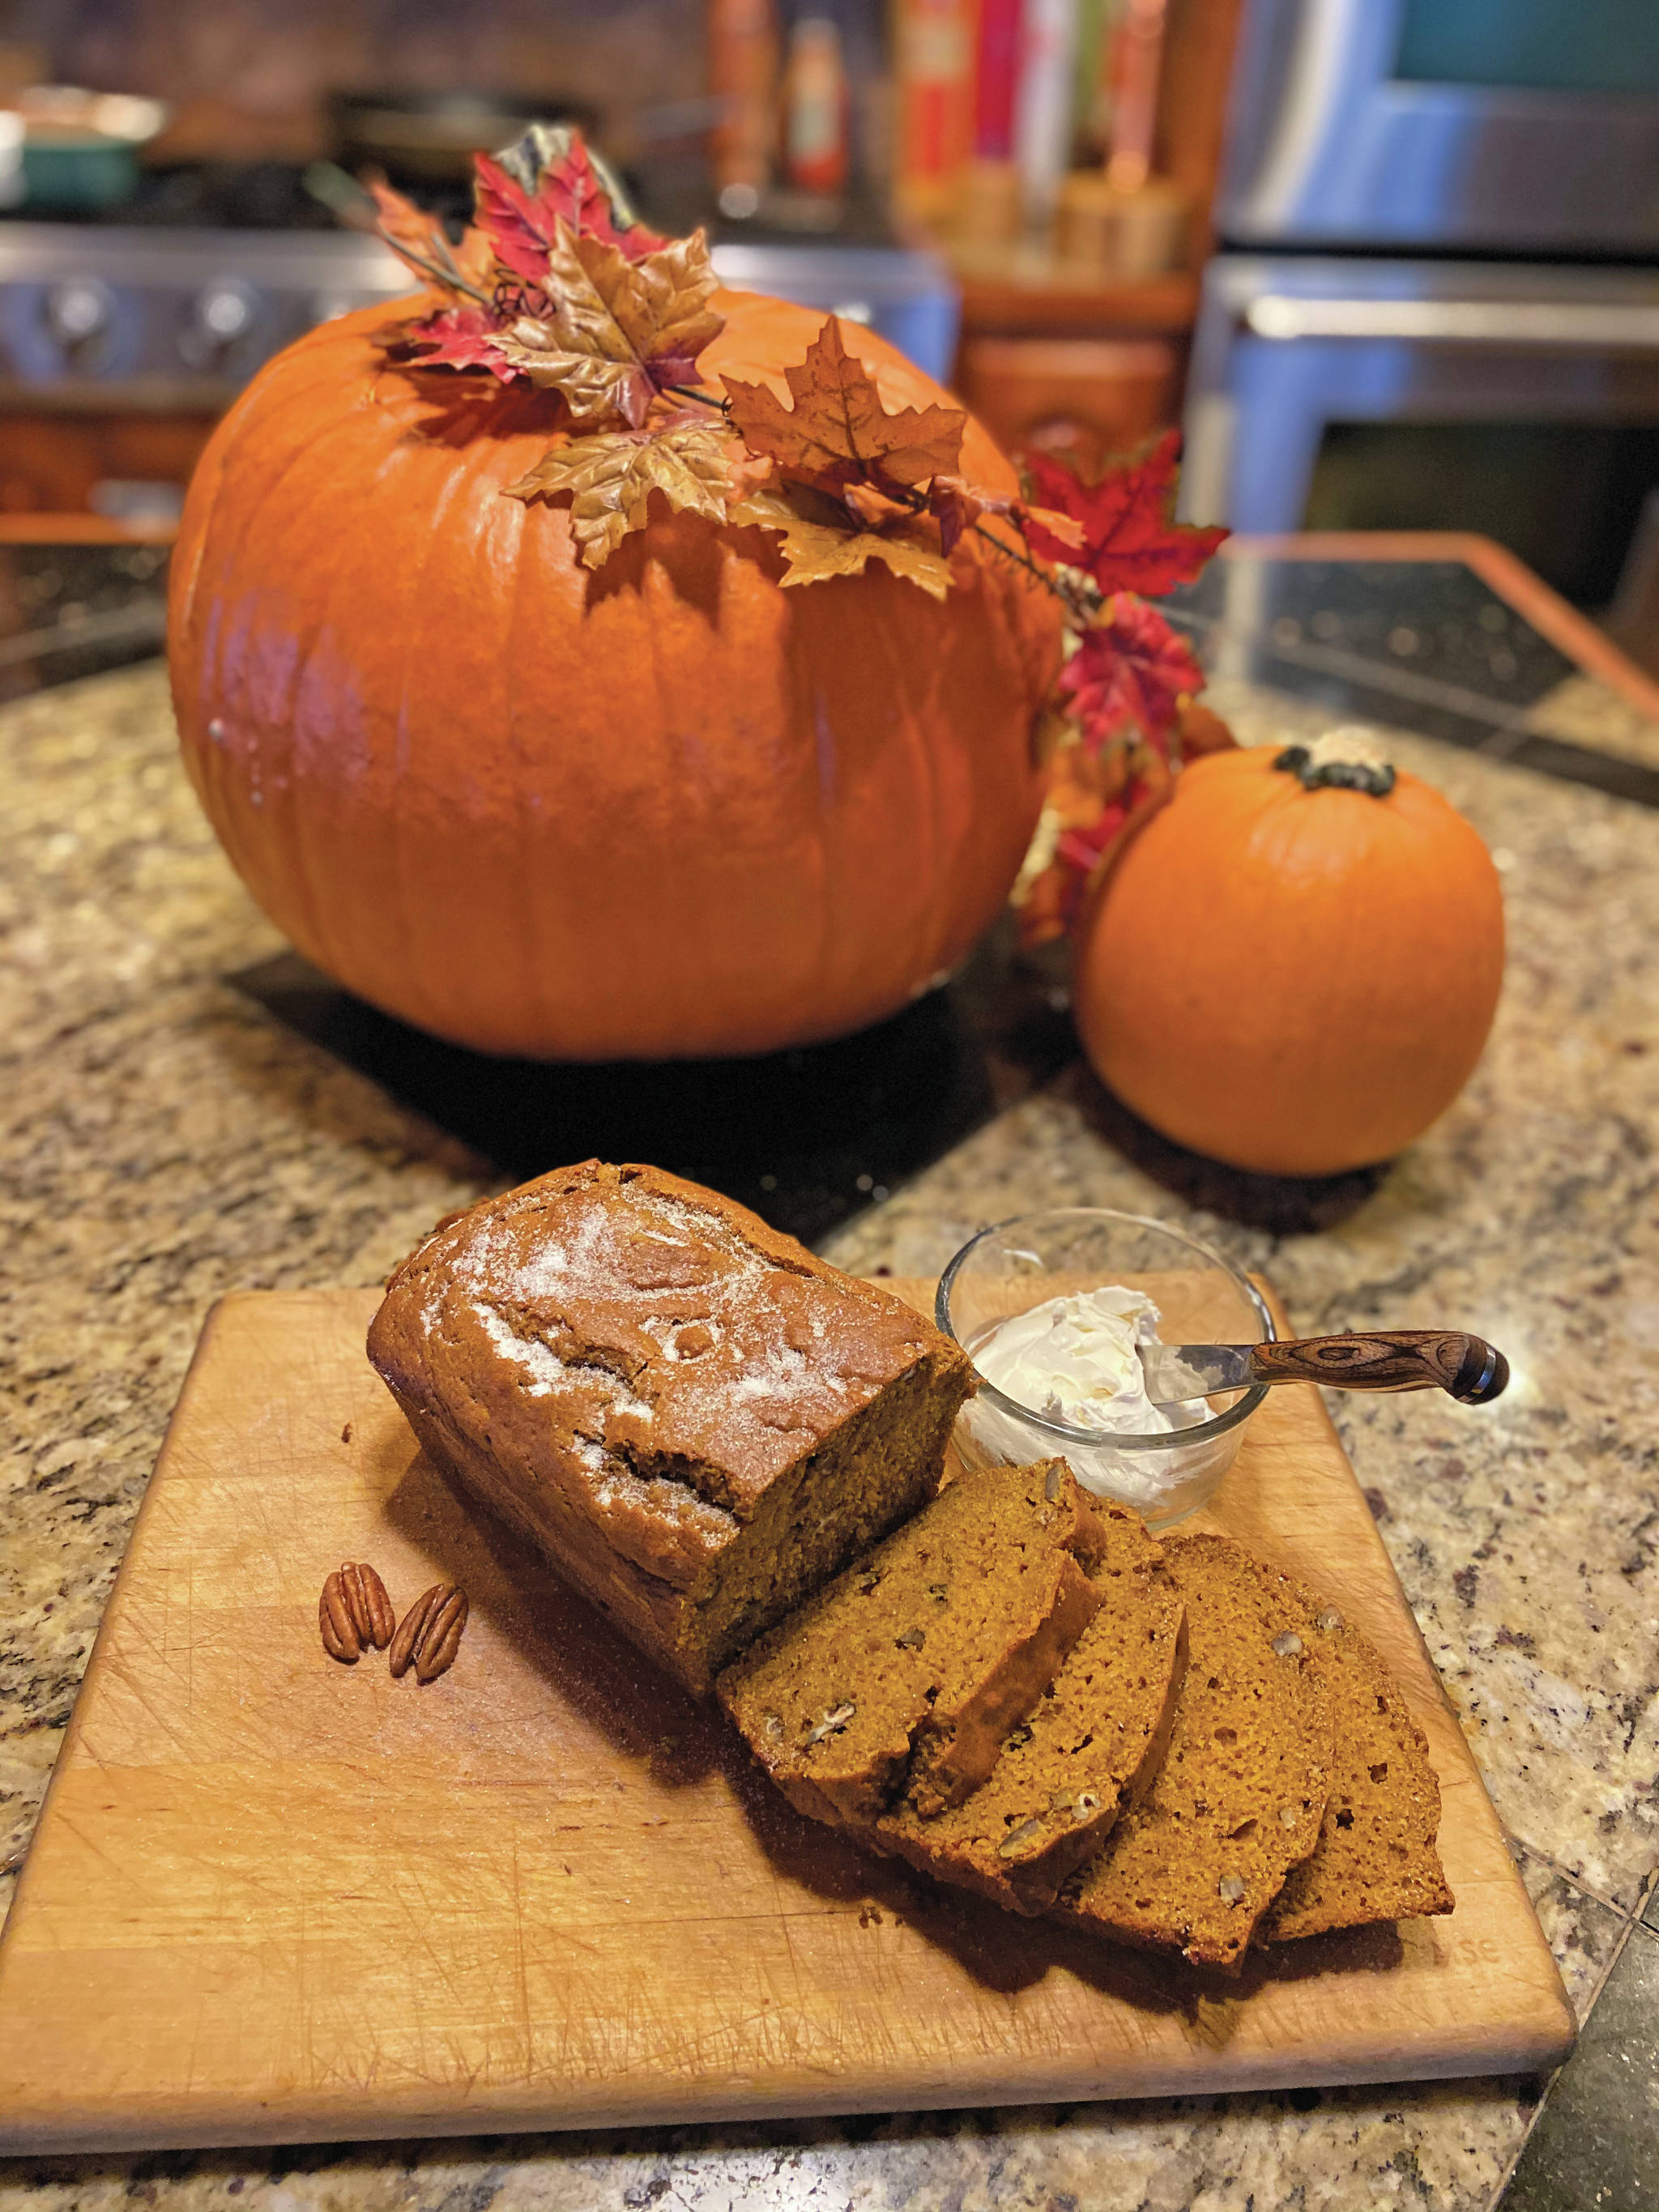 A little bit of pumpkin butter is the perfect complement to Teri Robl’s pumpkin bread, as seen here in her kitchen on Oct. 29, 2019, in Homer, Alaska. (Photo by Teri Robl)                                A little bit of pumpkin butter is the perfect complement to Teri Robl’s pumpkin bread, as seen here in her kitchen on Oct. 29, 2019, in Homer, Alaska. (Photo by Teri Robl)